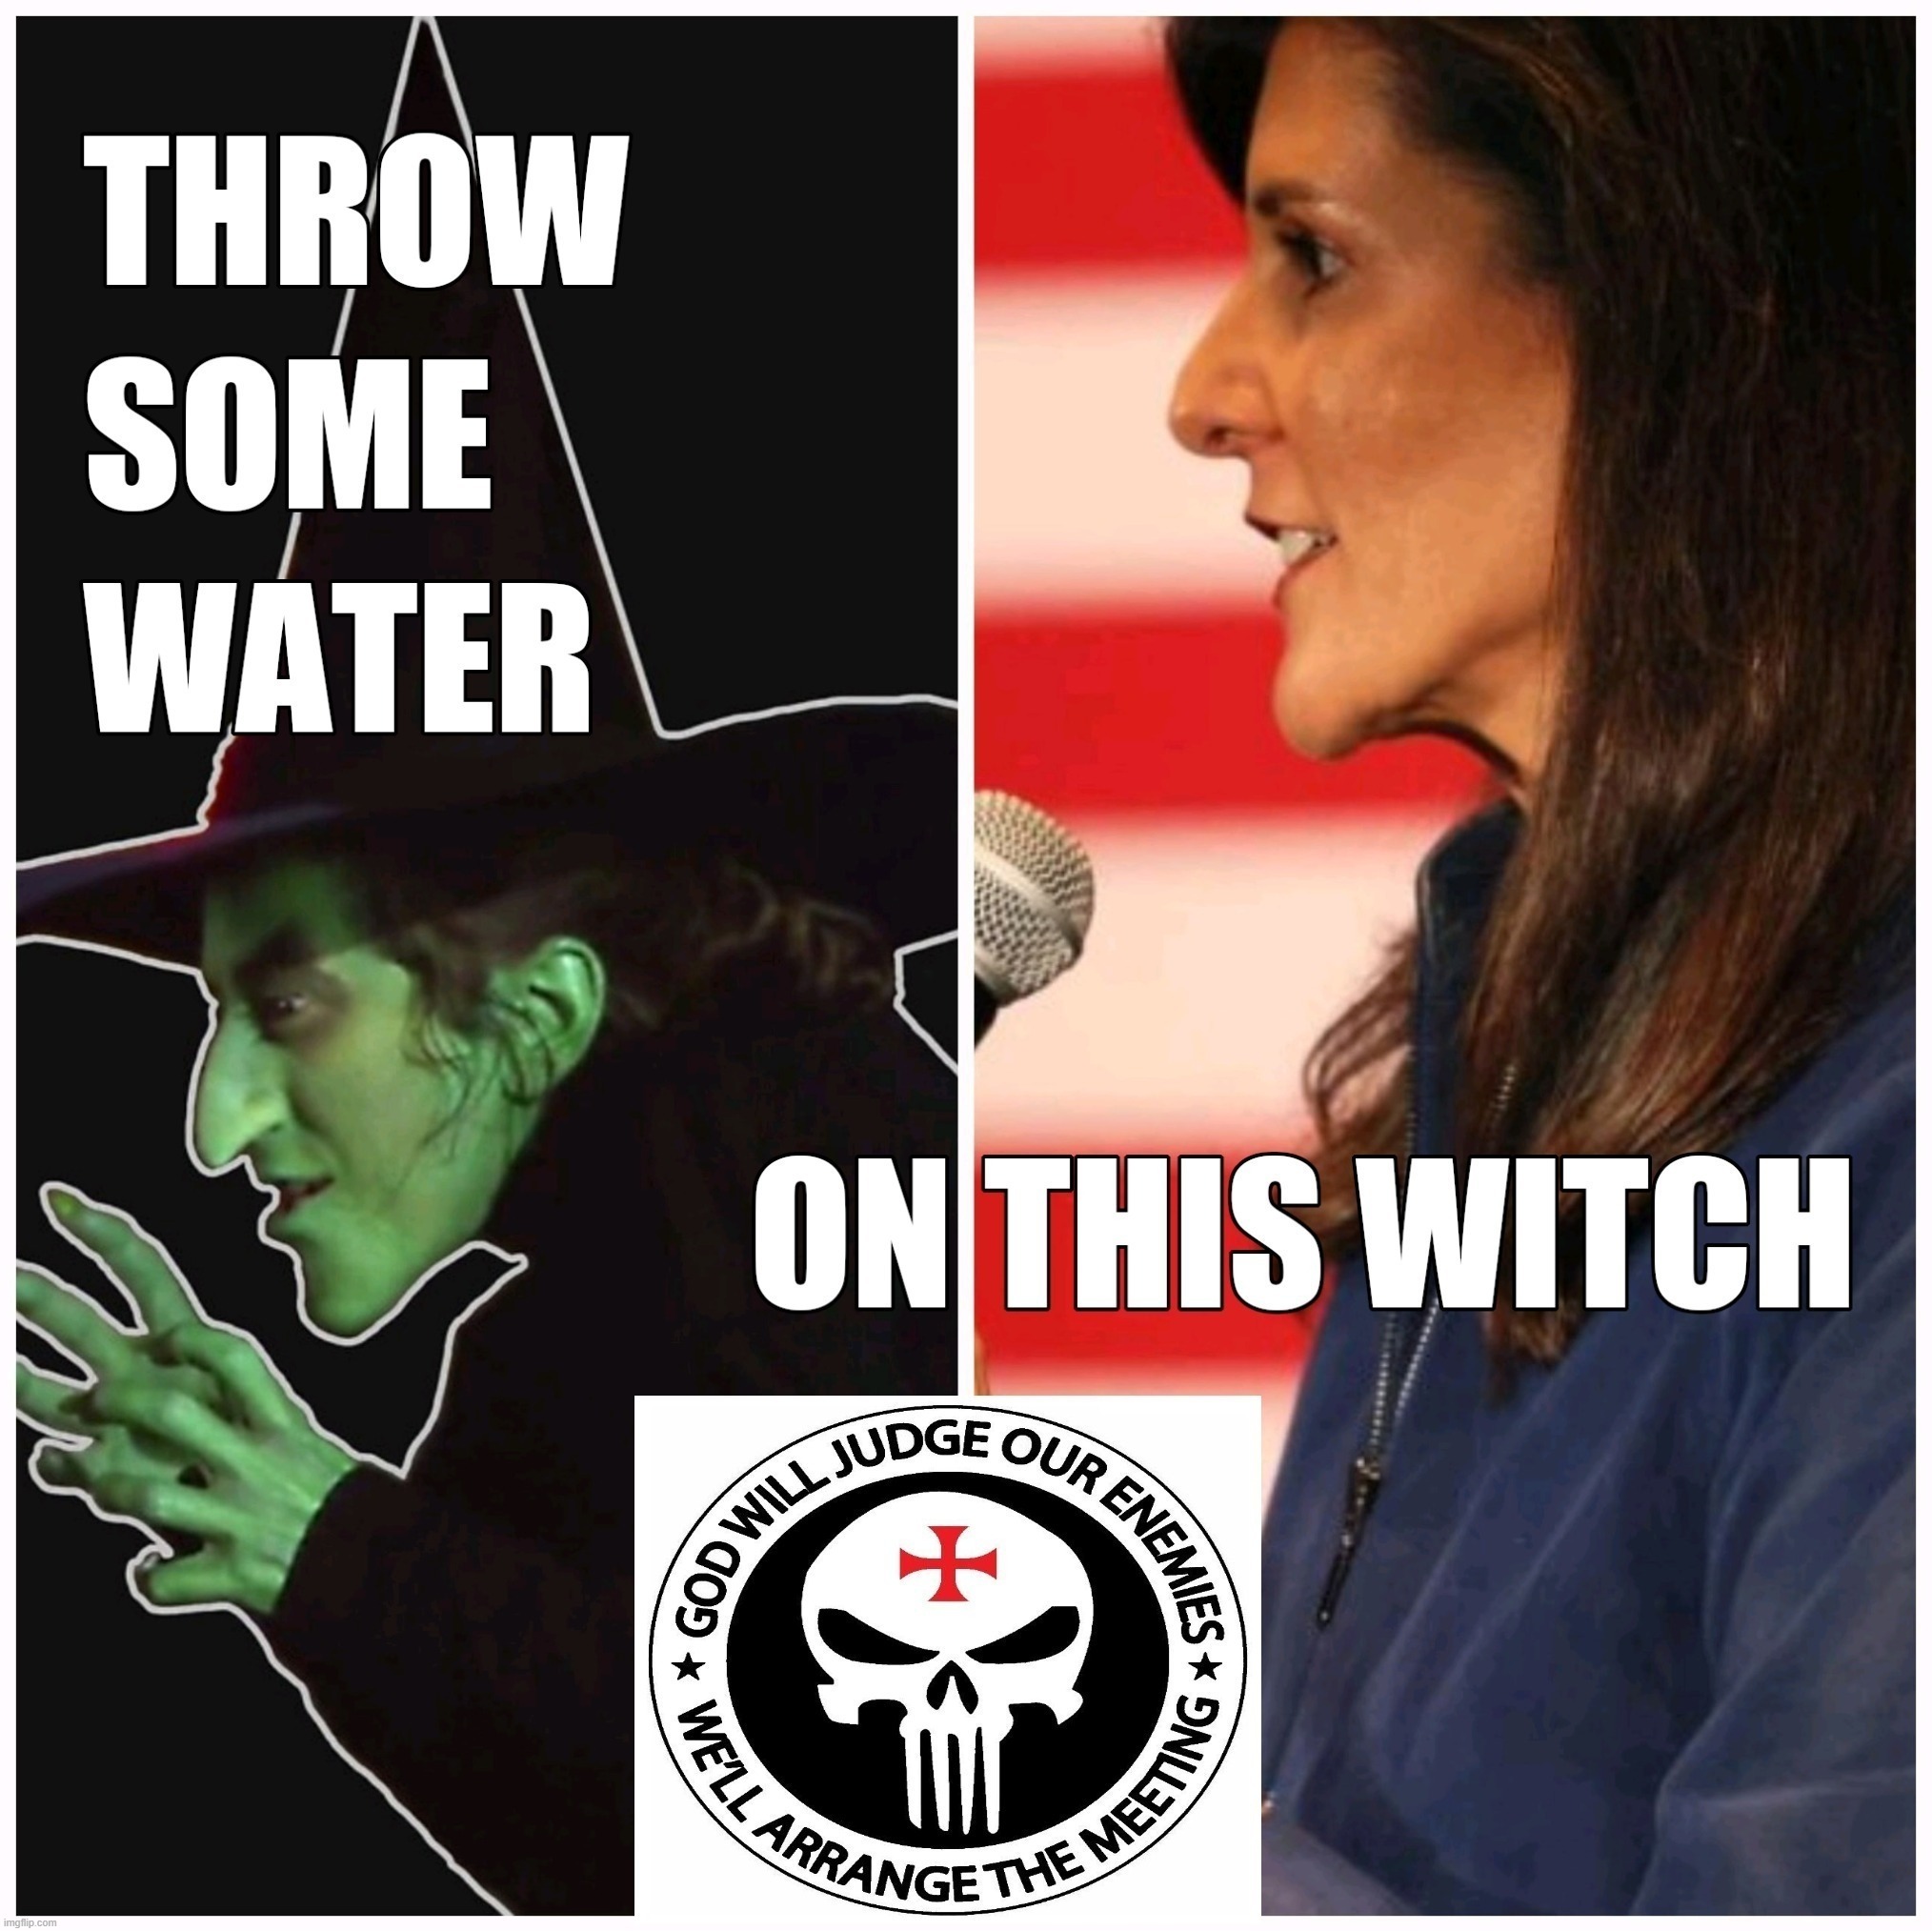 Throw some water on this witch! | image tagged in nikki haley,wicked witch of the east,wicked witch,rino,two faced,turncoat | made w/ Imgflip meme maker